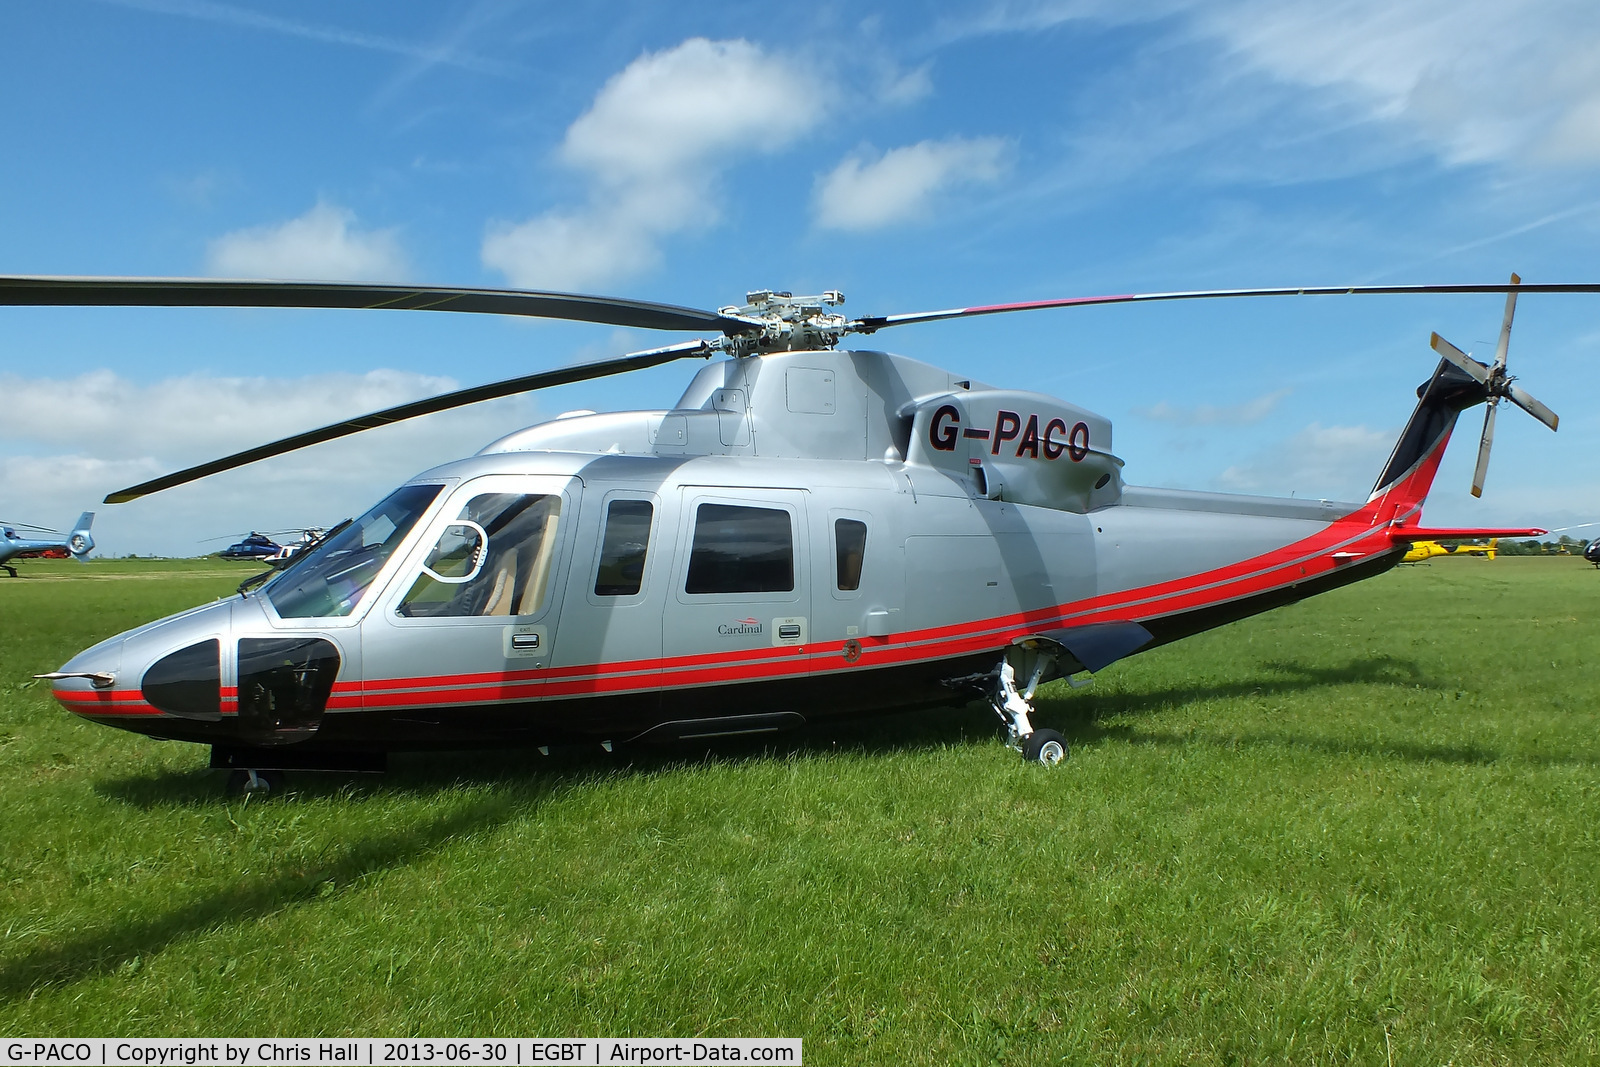 G-PACO, 2009 Sikorsky S-76C C/N 760782, being used for ferrying race fans to the British F1 Grand Prix at Silverstone